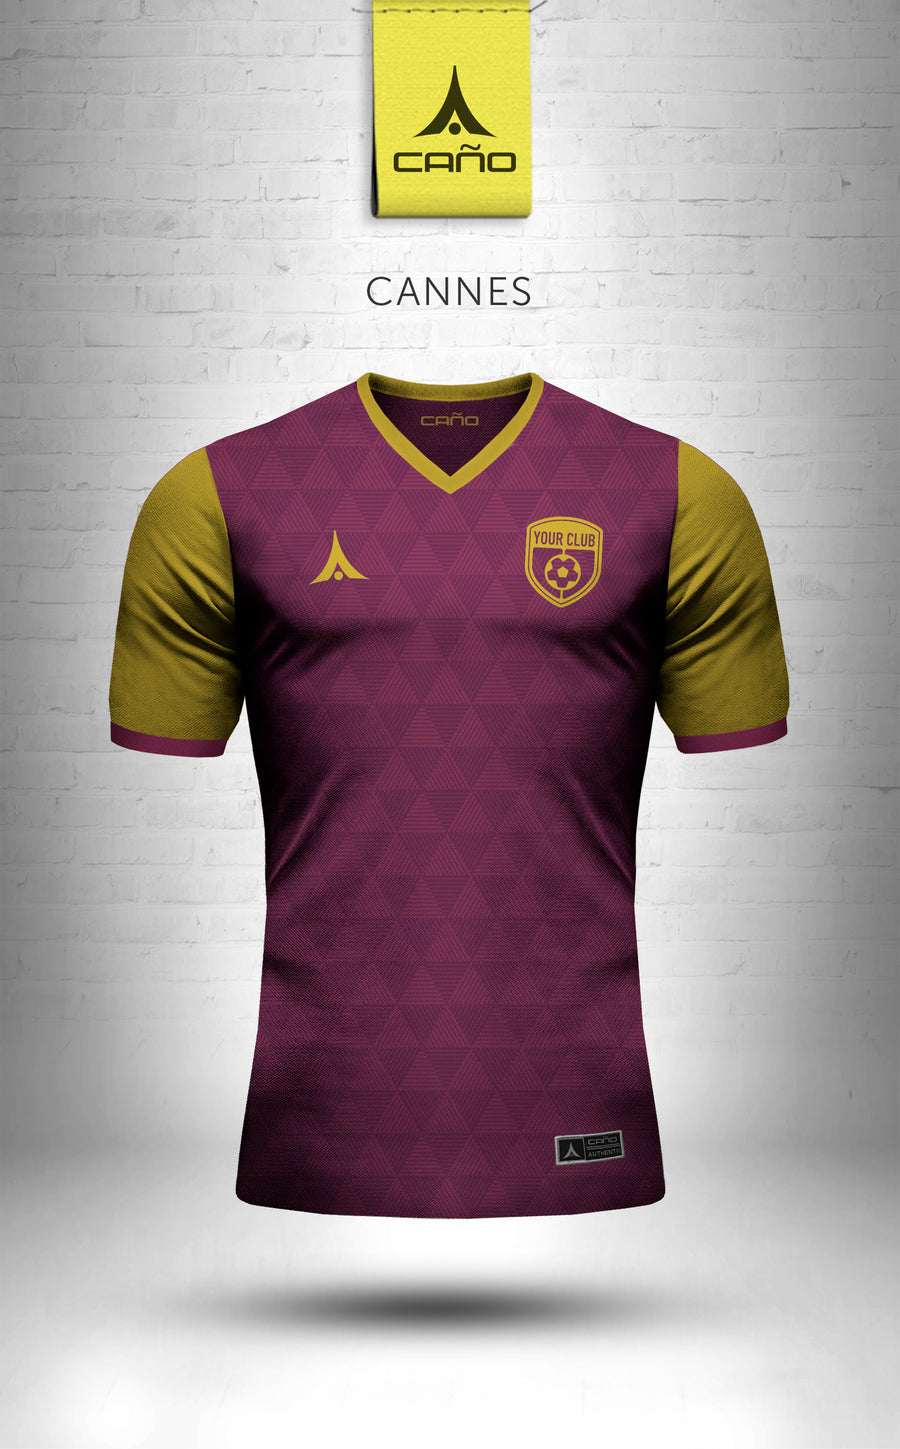 Cannes in maroon/gold